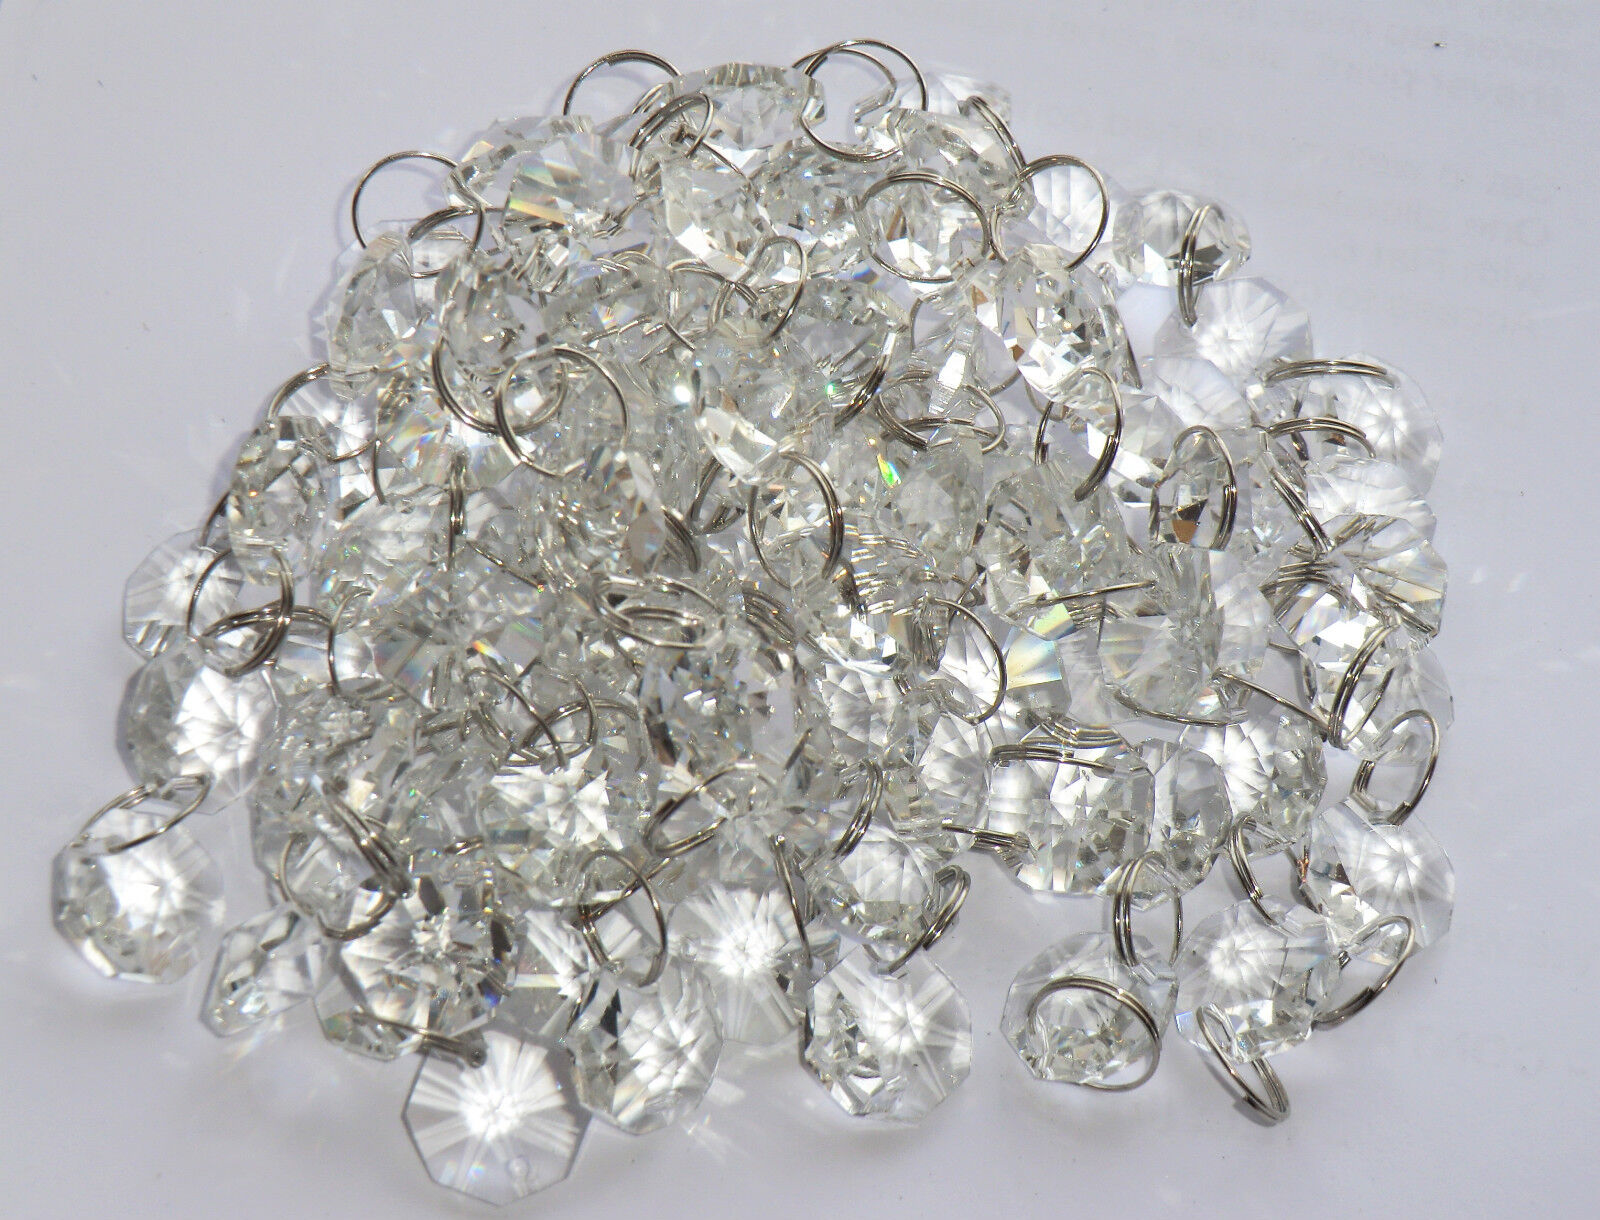 100 CHANDELIER LIGHT CRYSTALS DROPLETS GLASS BEAD WEDDING DROPS 14MM PRISM PARTS